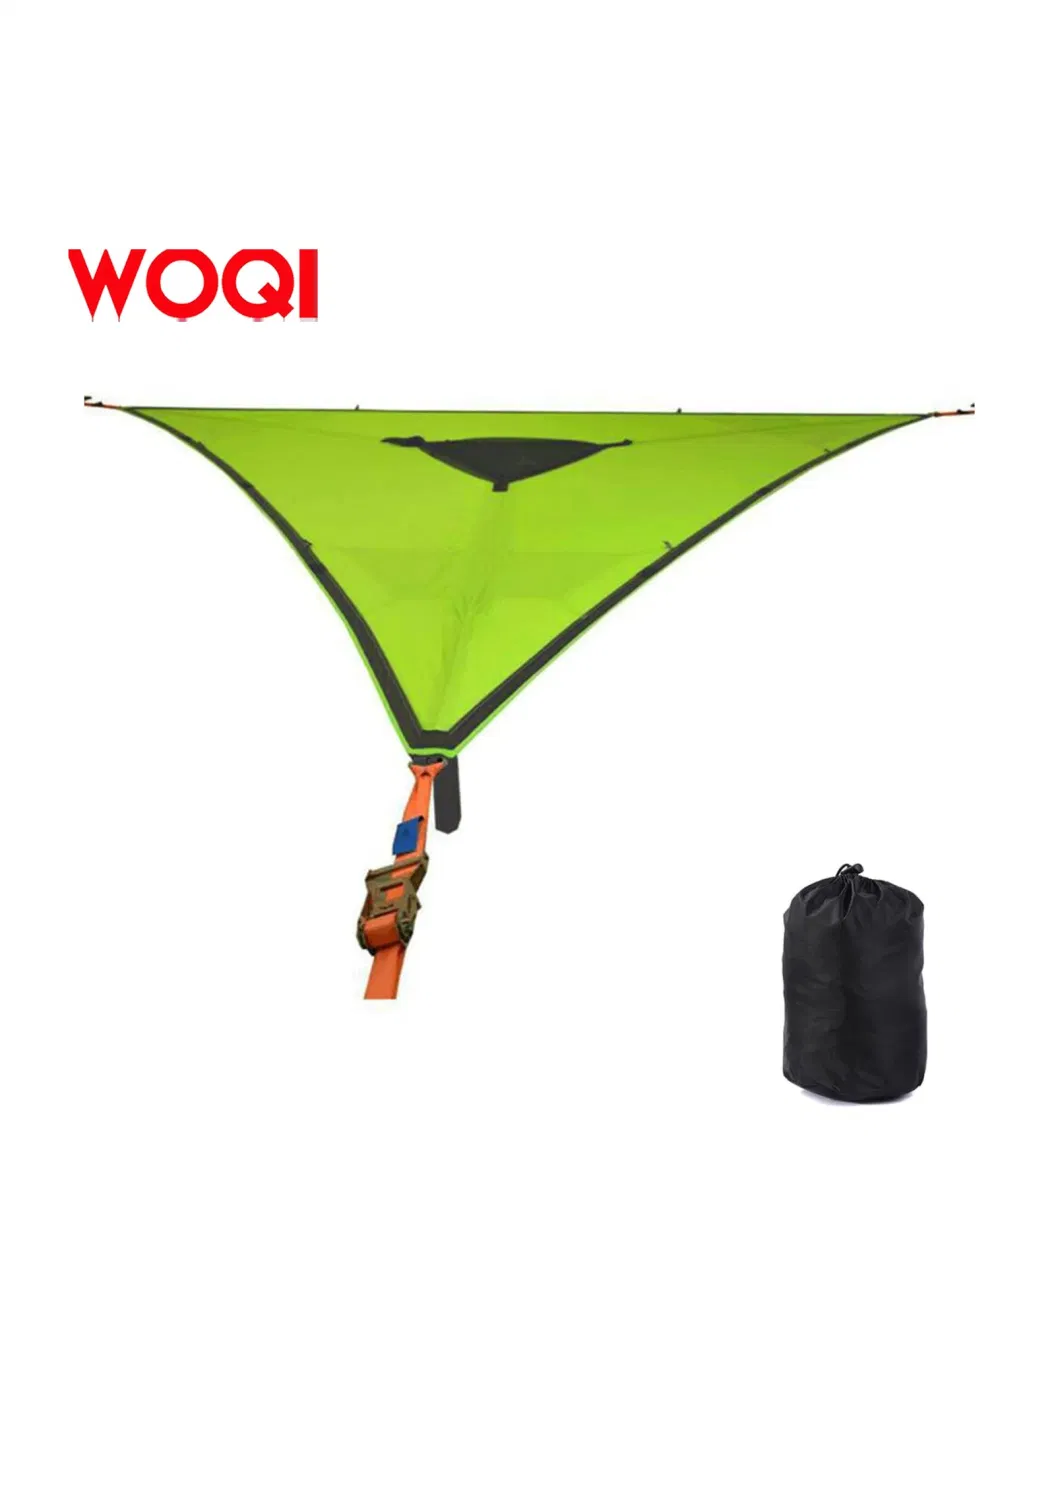 Woqi Triangular Hammock, a Portable Hammock That Can Be Used by Multiple People